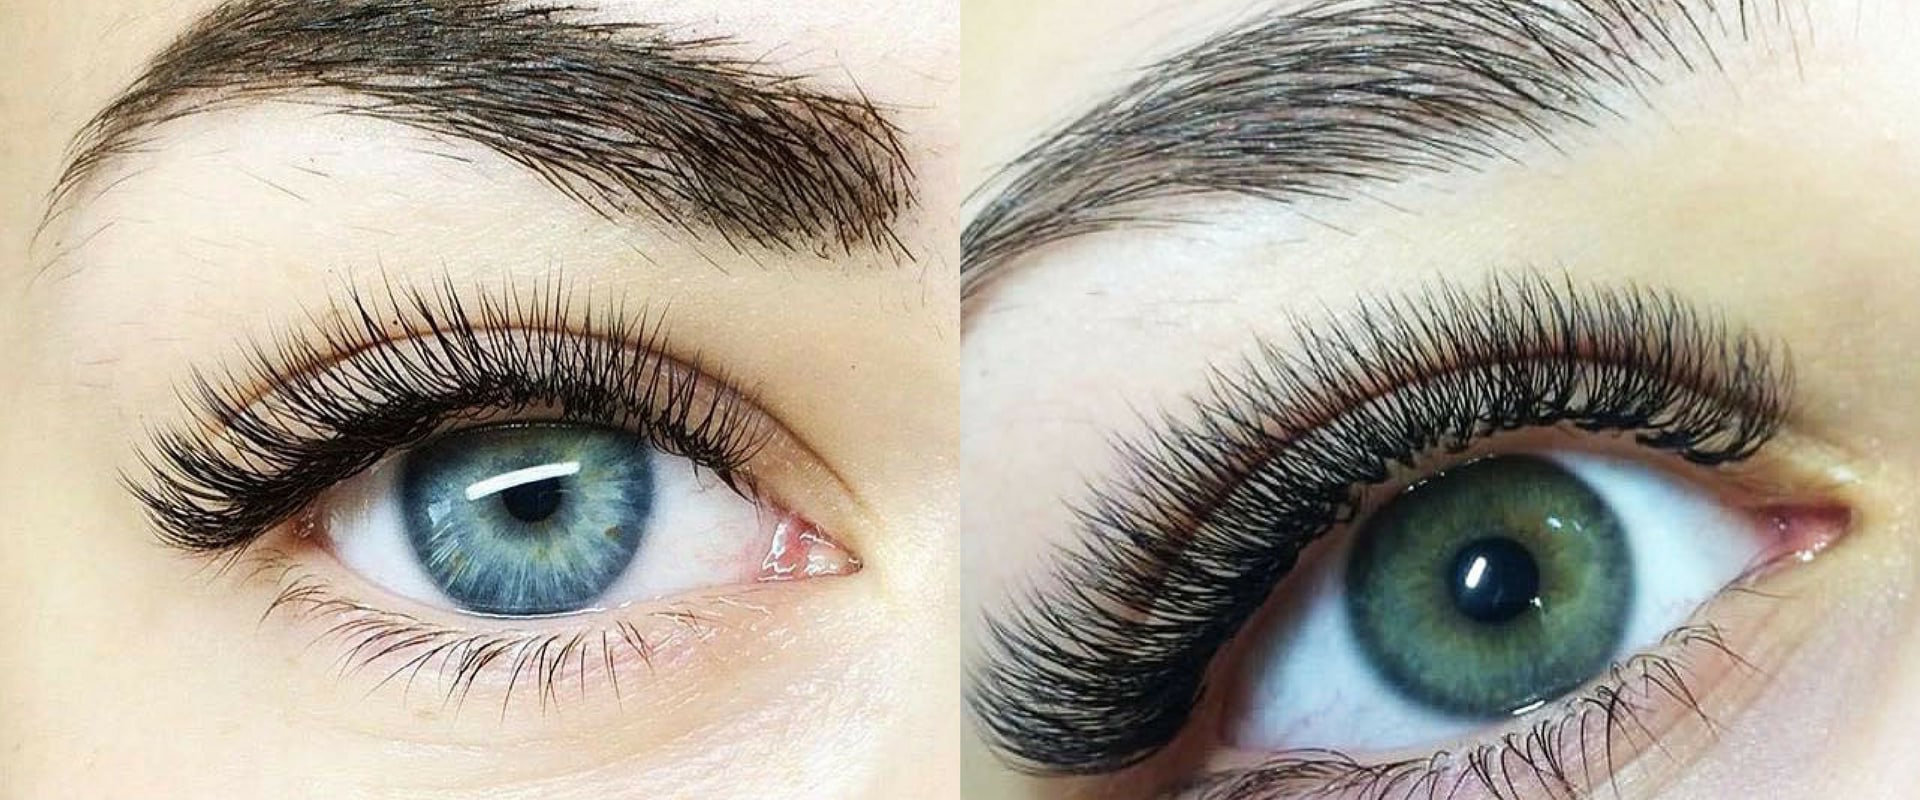 What type of lash extensions are best?